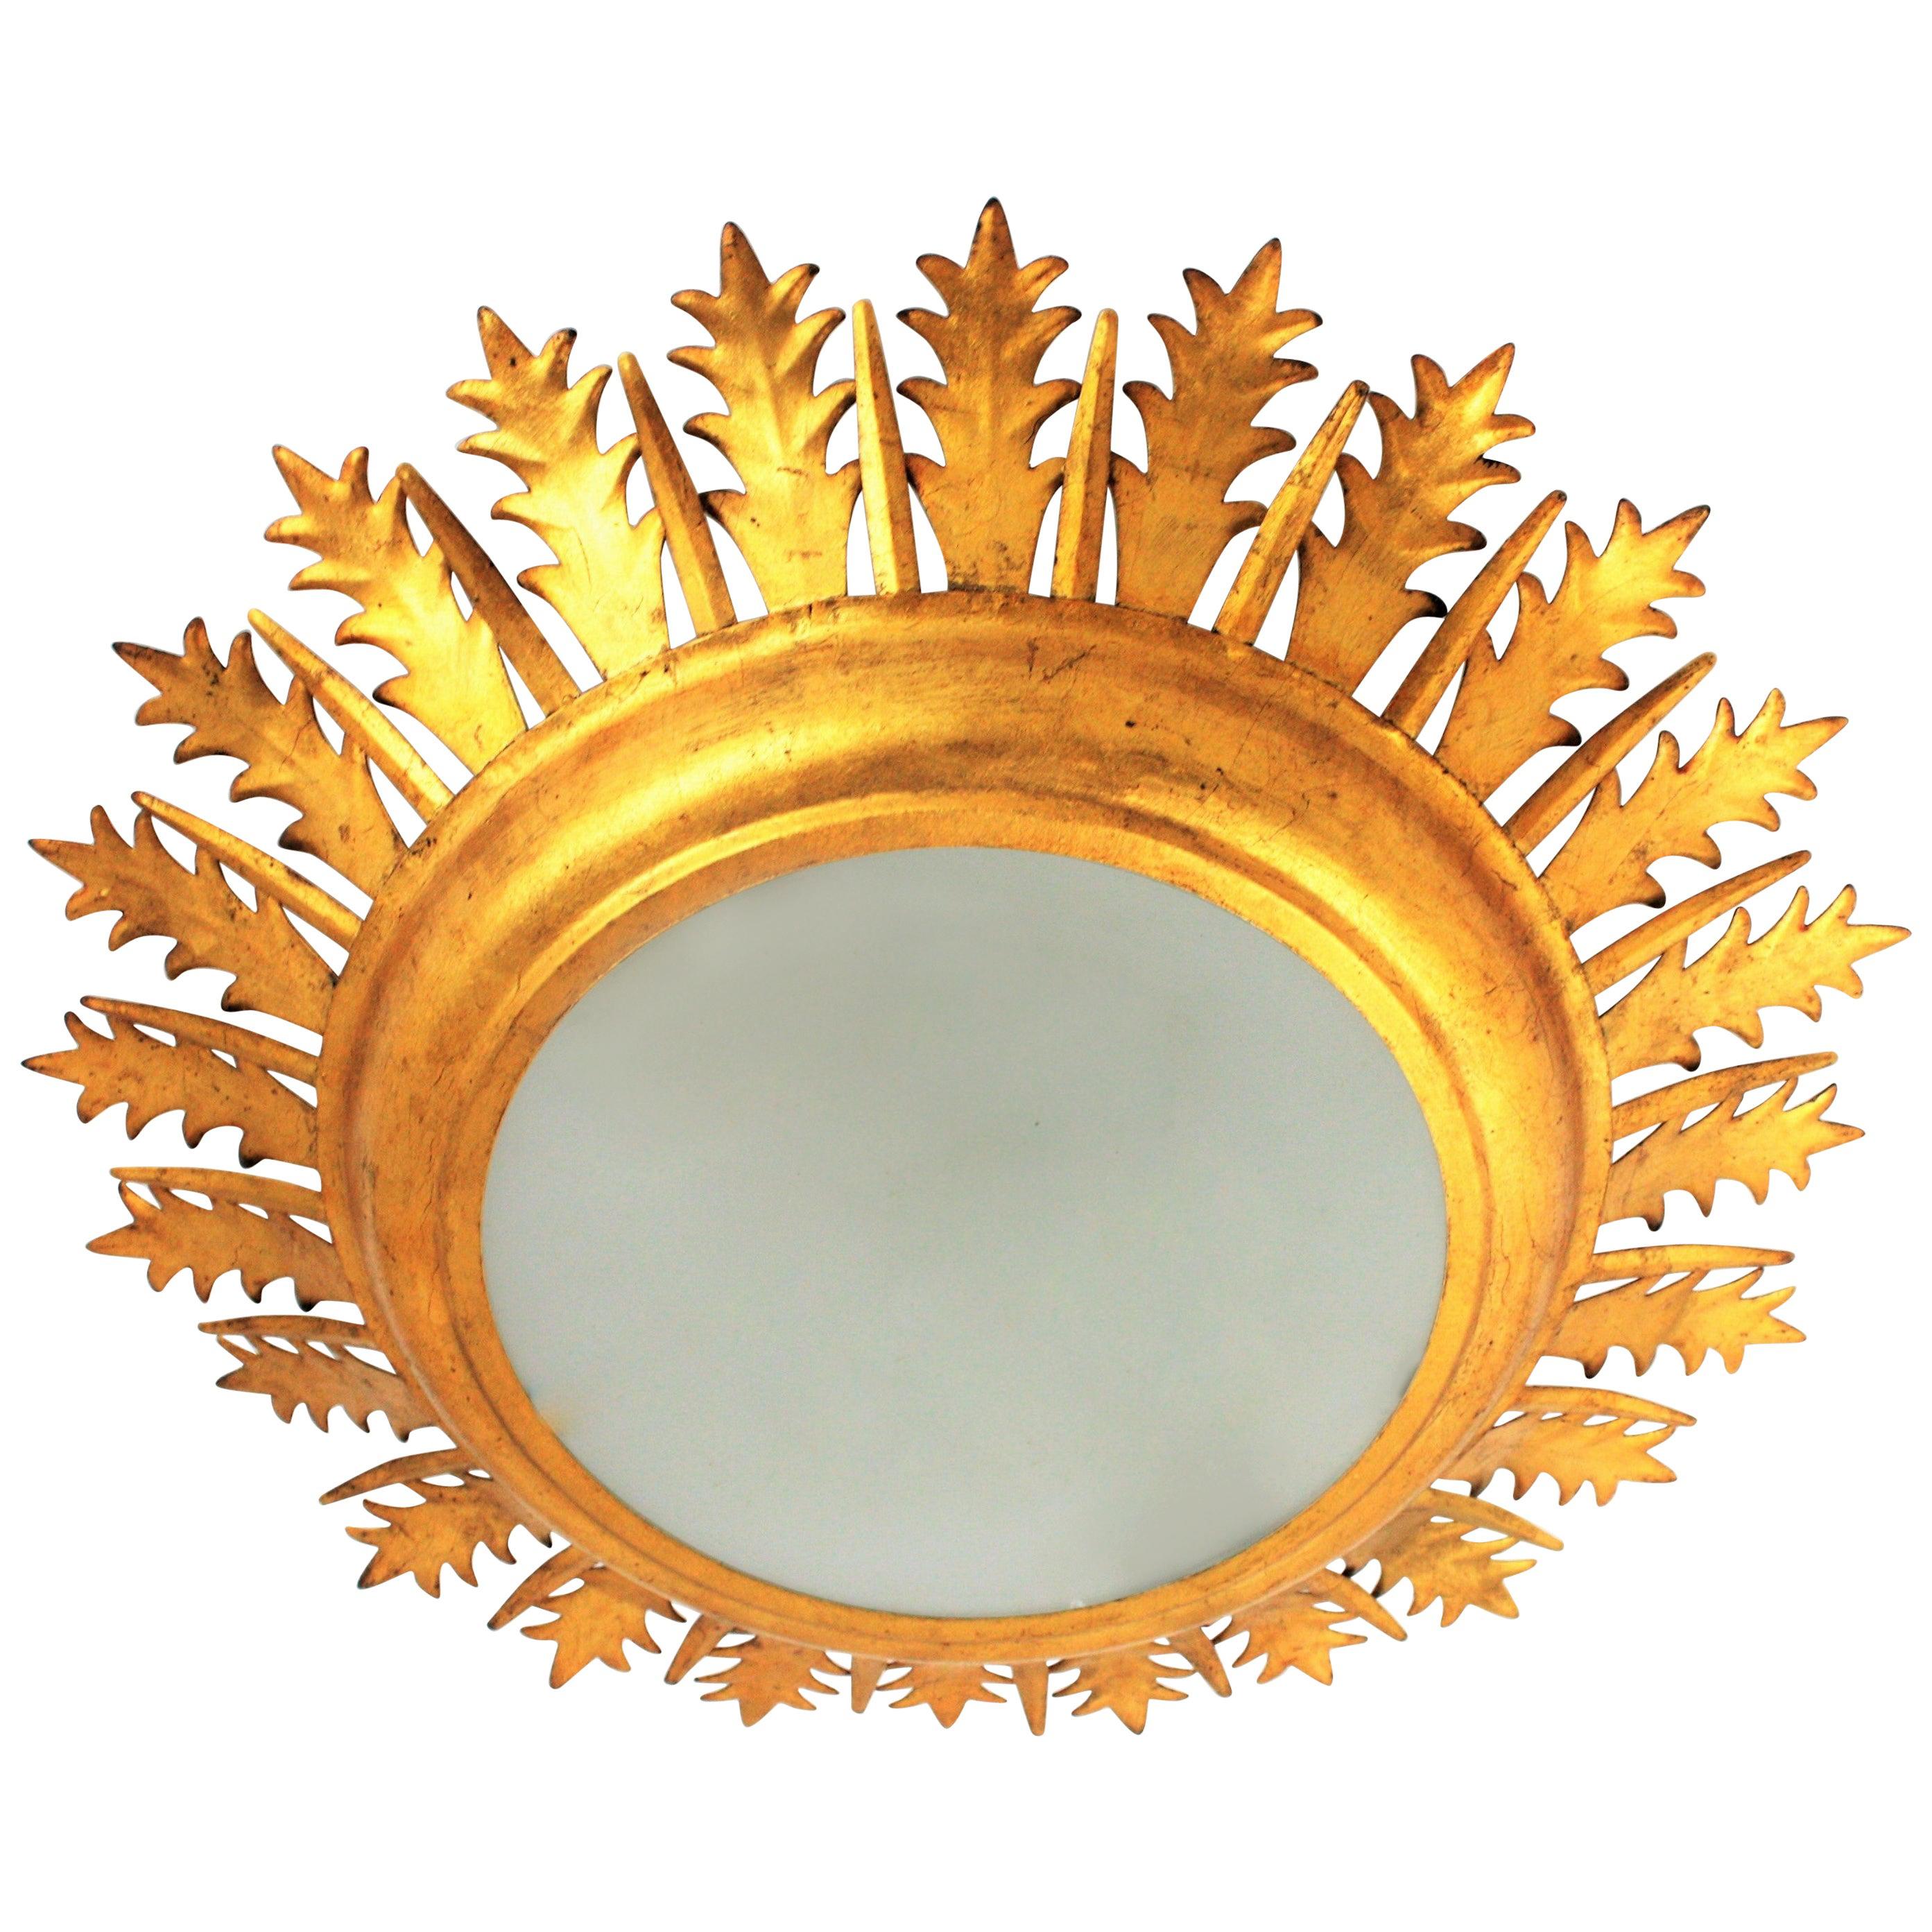 Extra Large Gilt Iron Crown Sunburst Ceiling Light Fixture with Frosted Glass